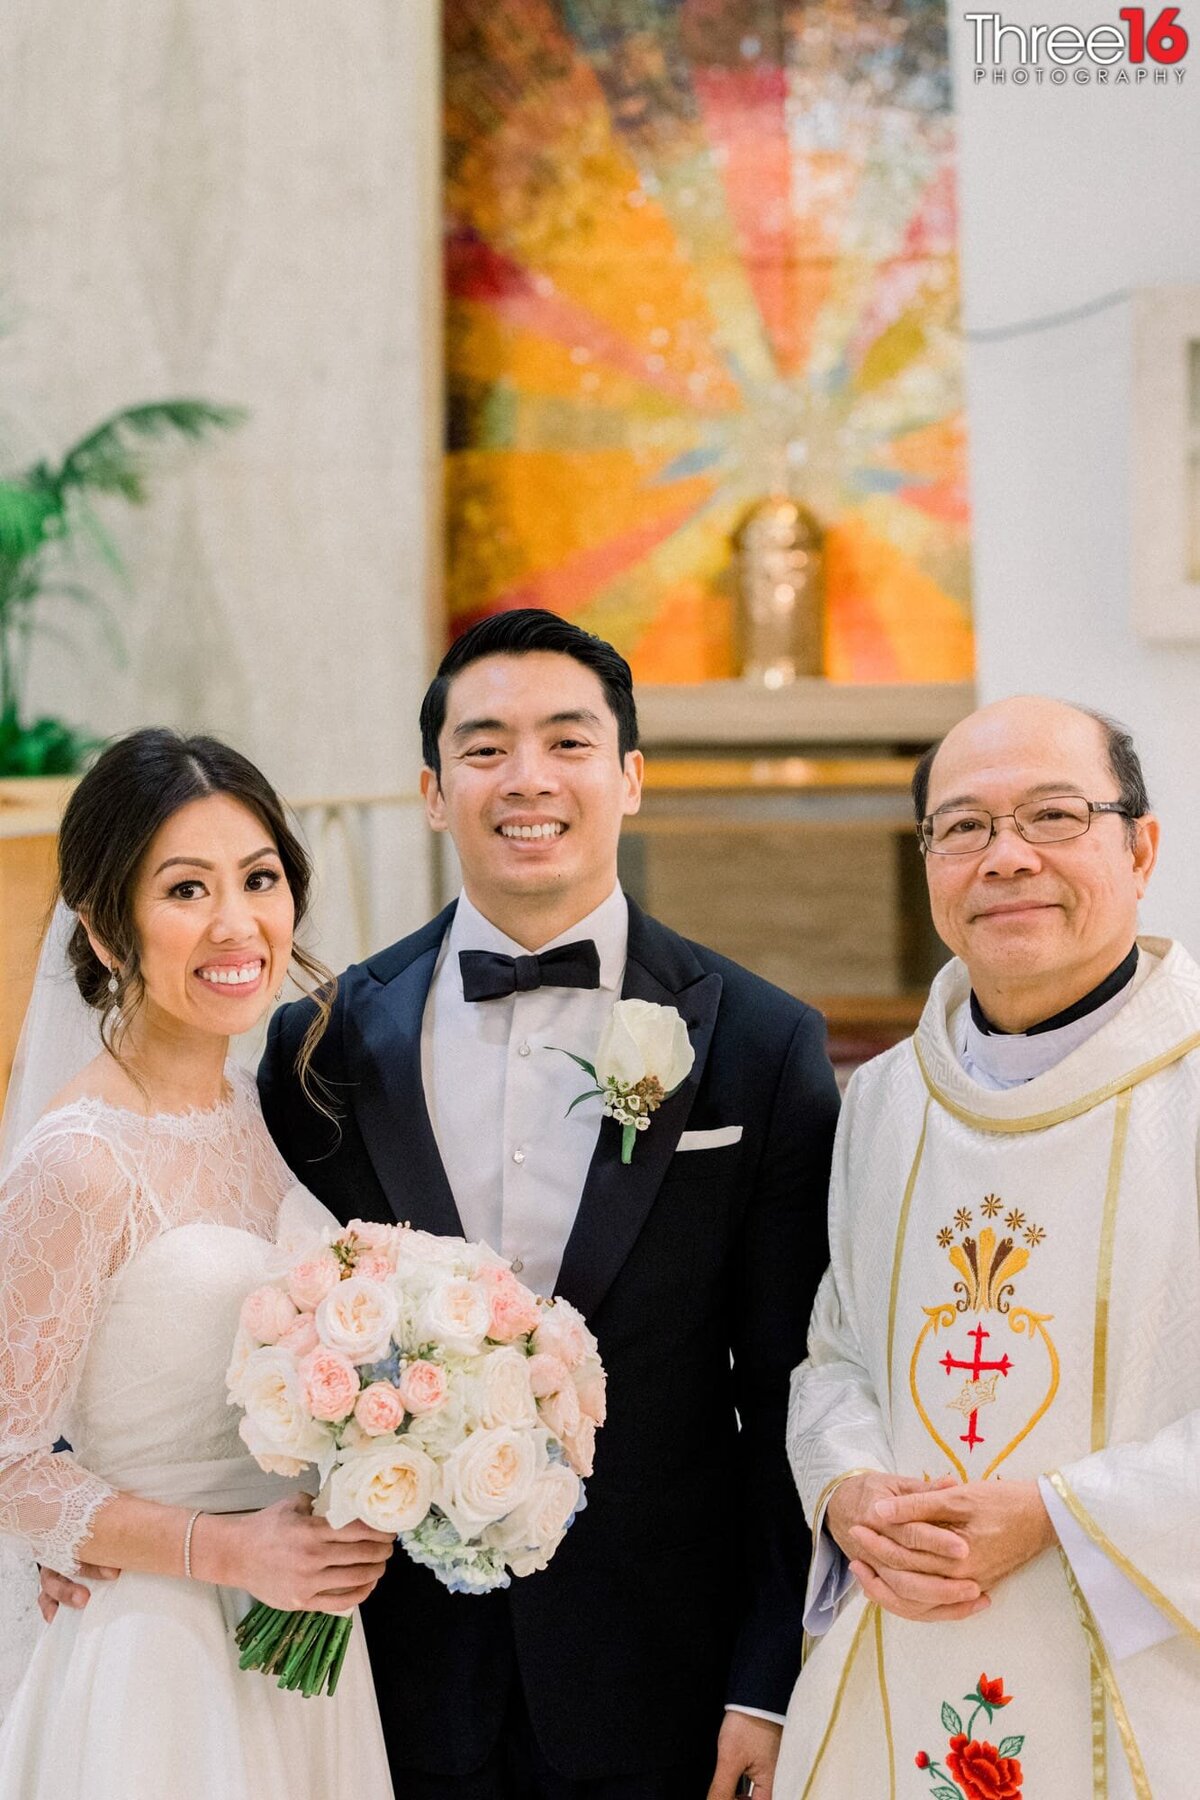 Bride and Groom pose for a photo with the priest